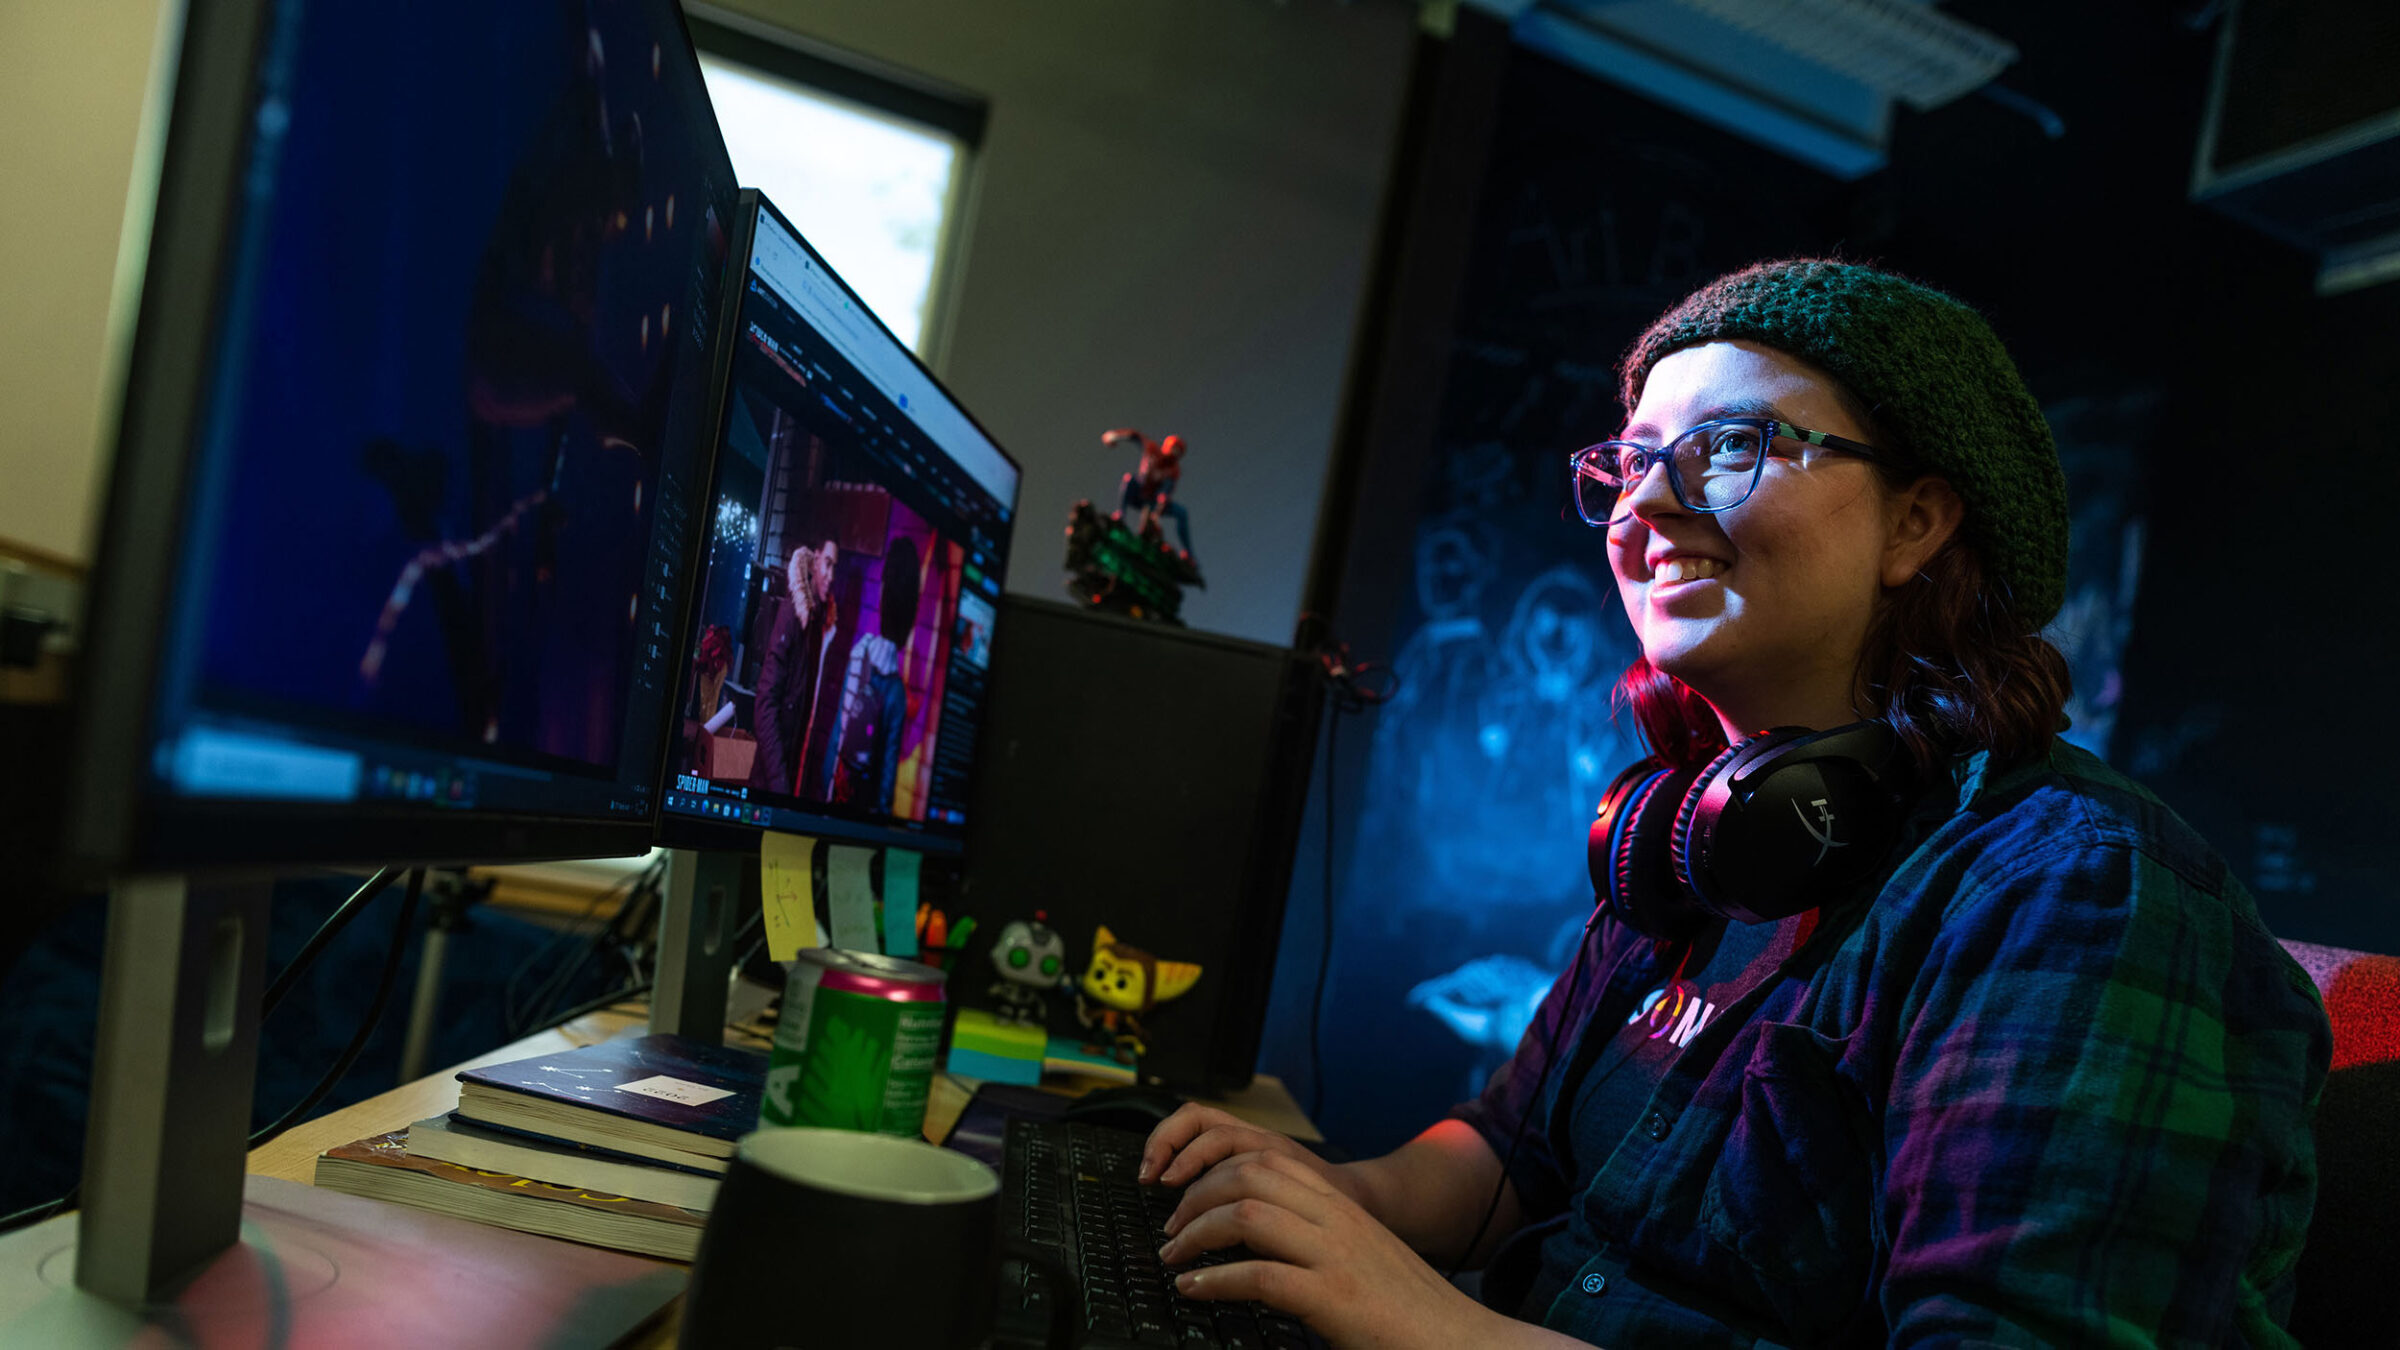 Game art student smiling at screen while working on a project